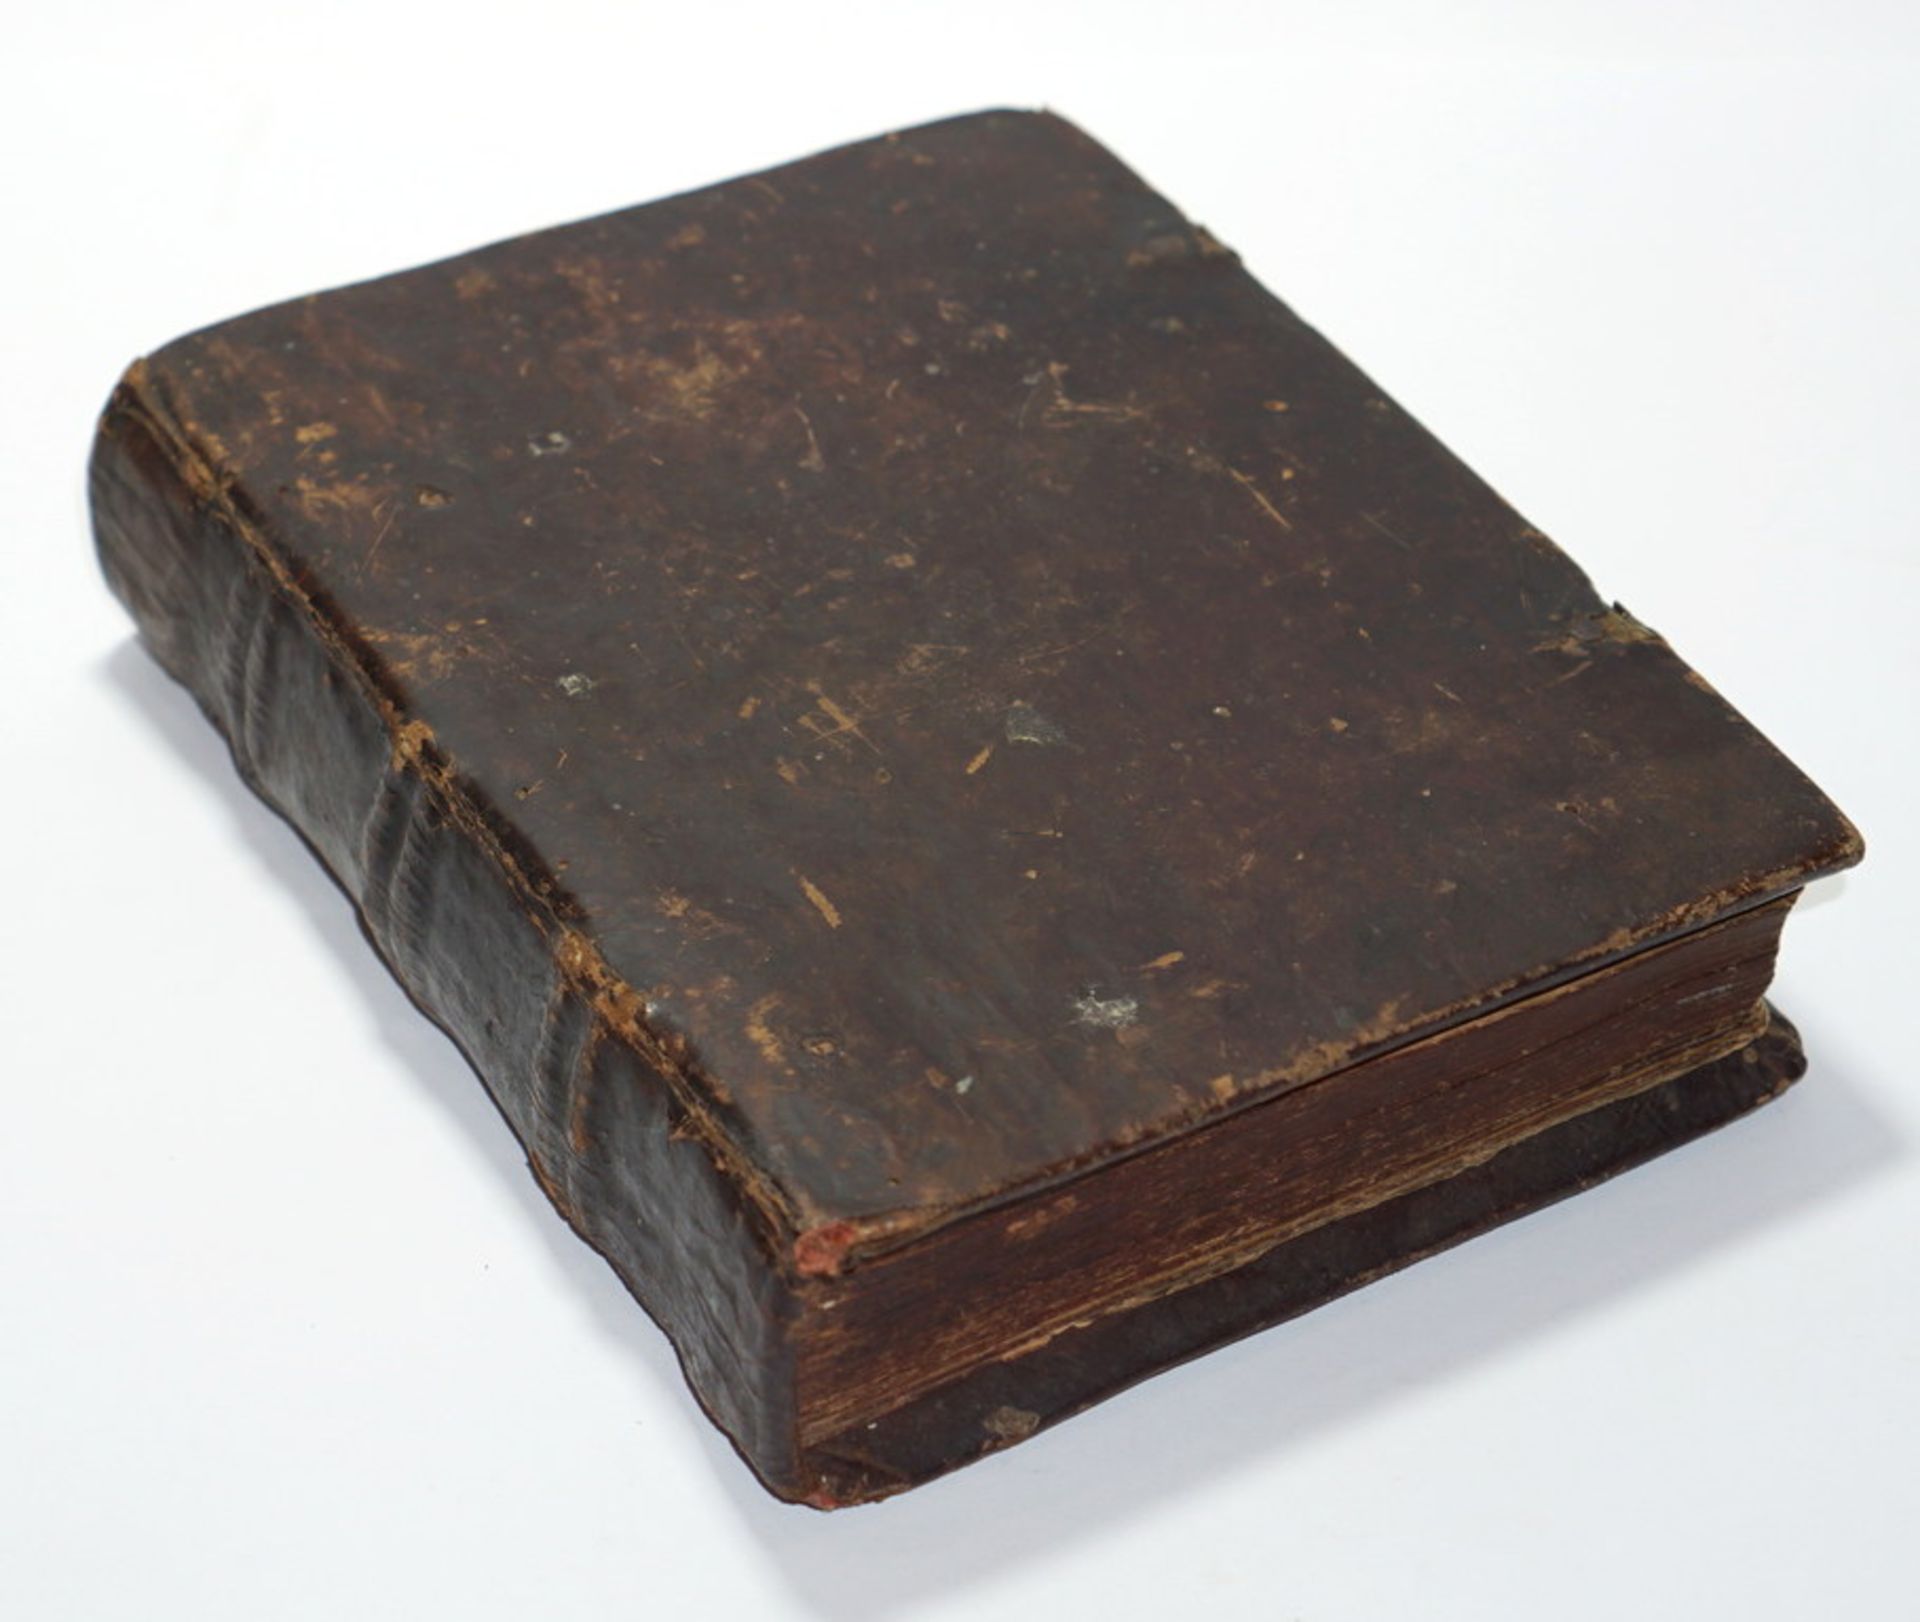 Old Believers book "Svyatci"